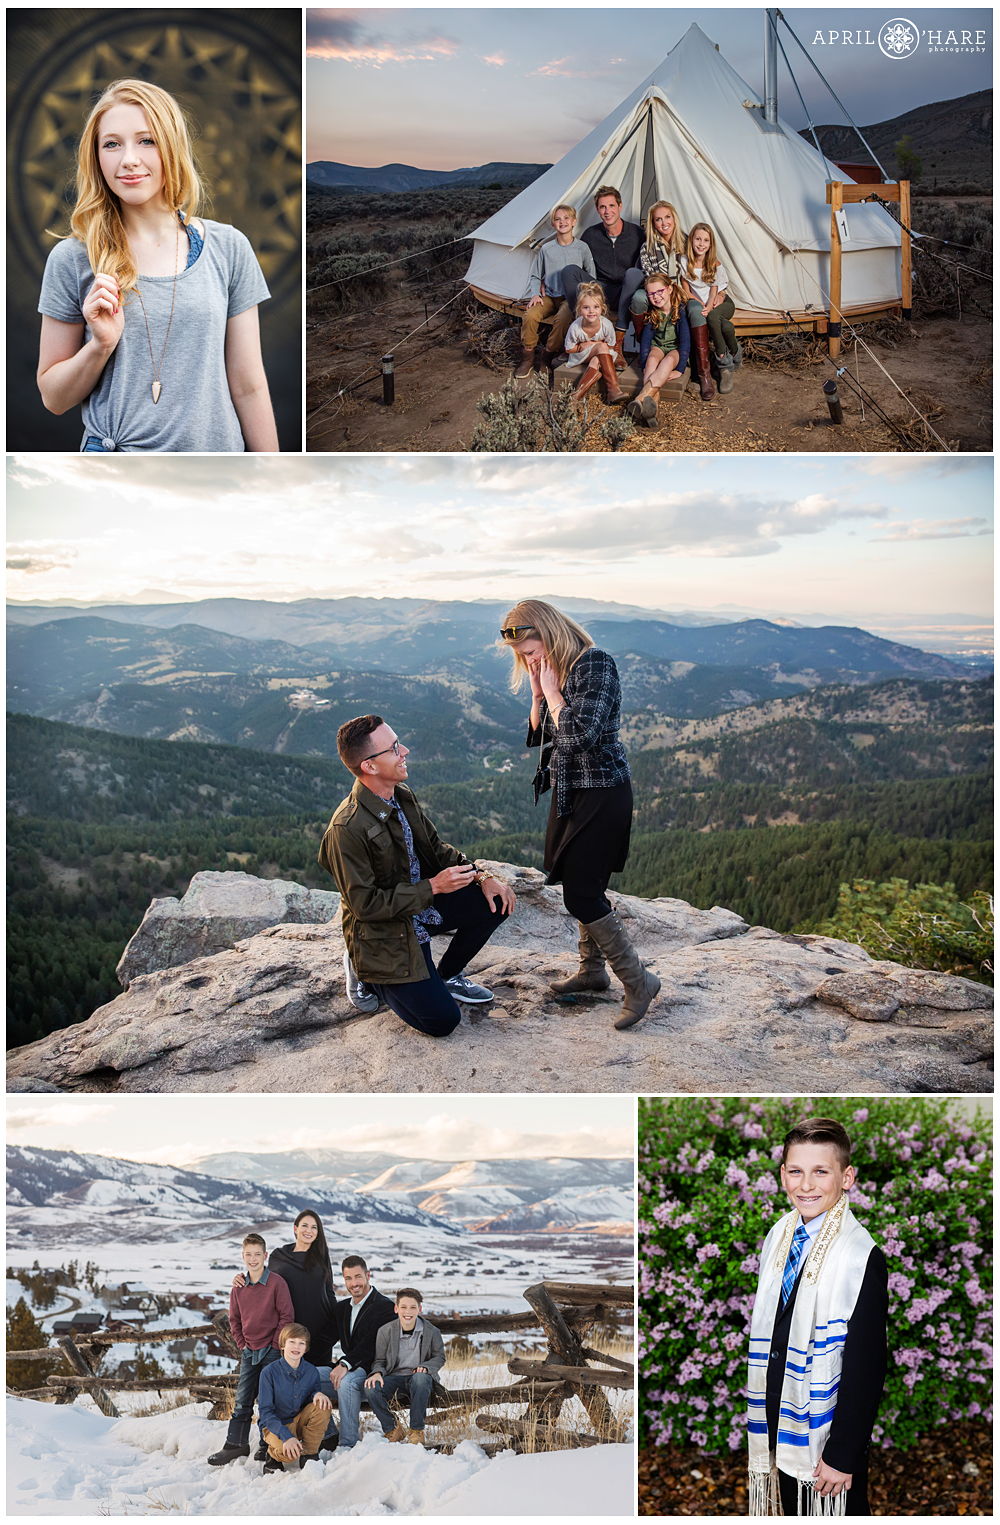 Best Photos of the Year for Weddings and Portraits in Colorado